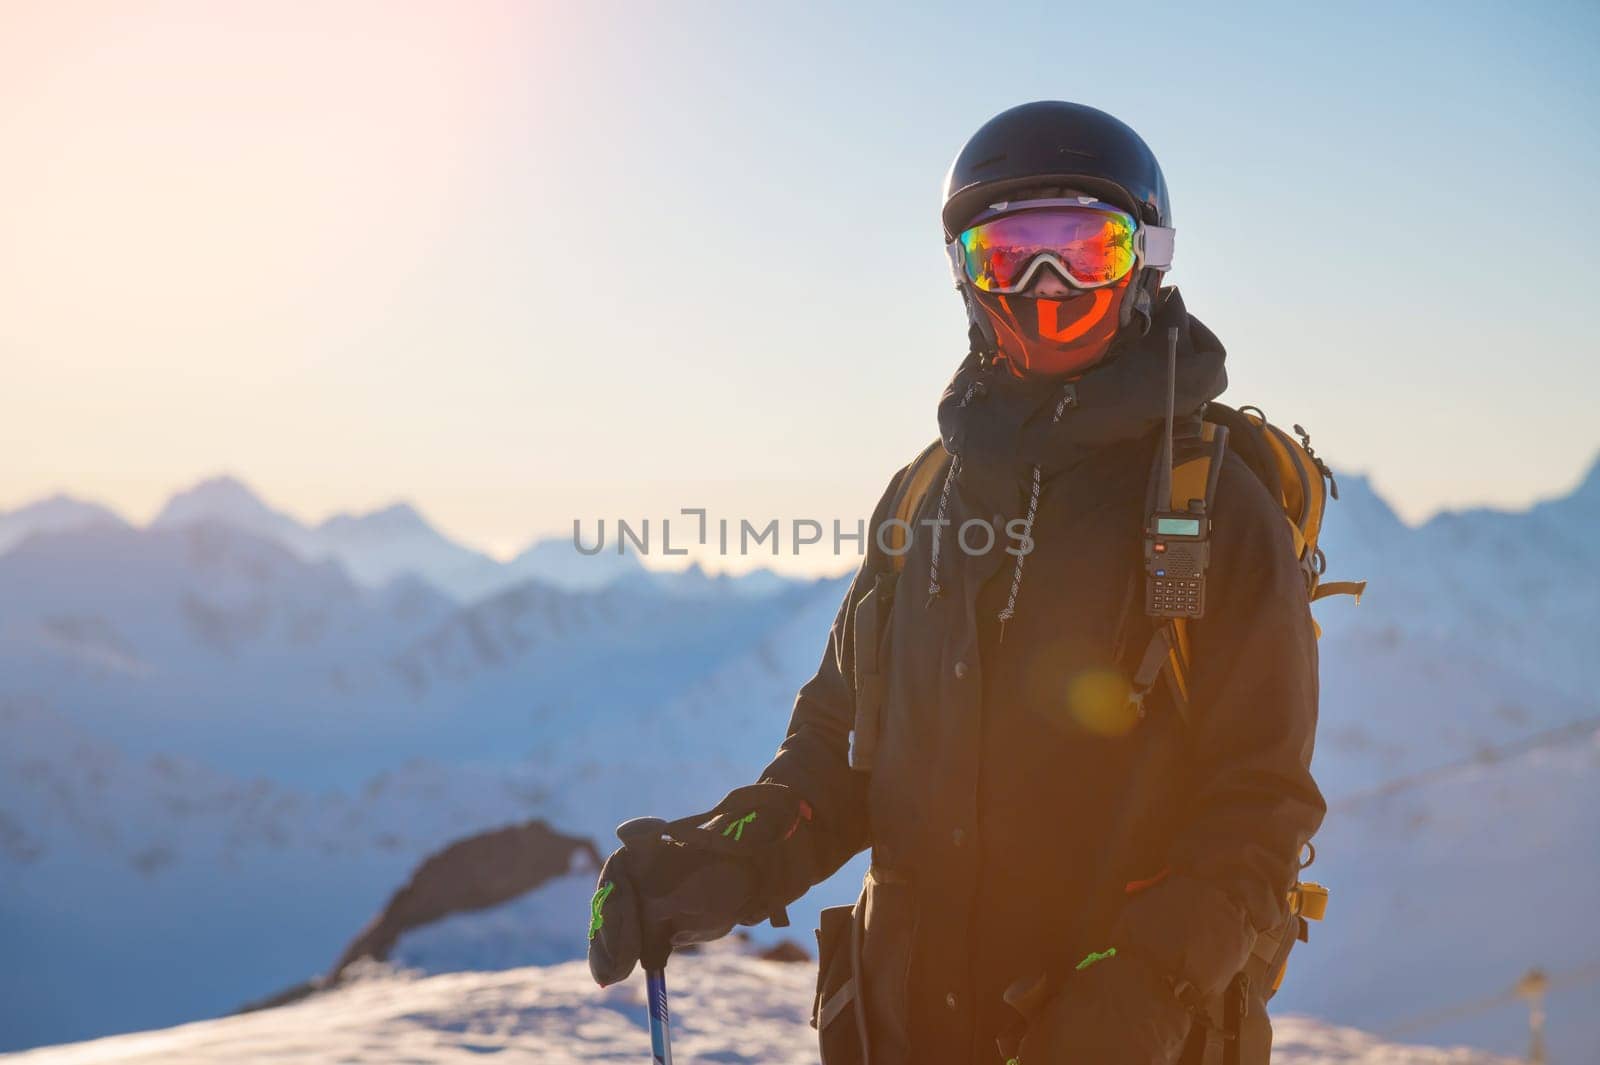 Portrait of a skier on the mountain at sunset. Portrait of a woman in a ski resort against the backdrop of mountains and blue sky. Winter sports, security, protection and radio communication by yanik88